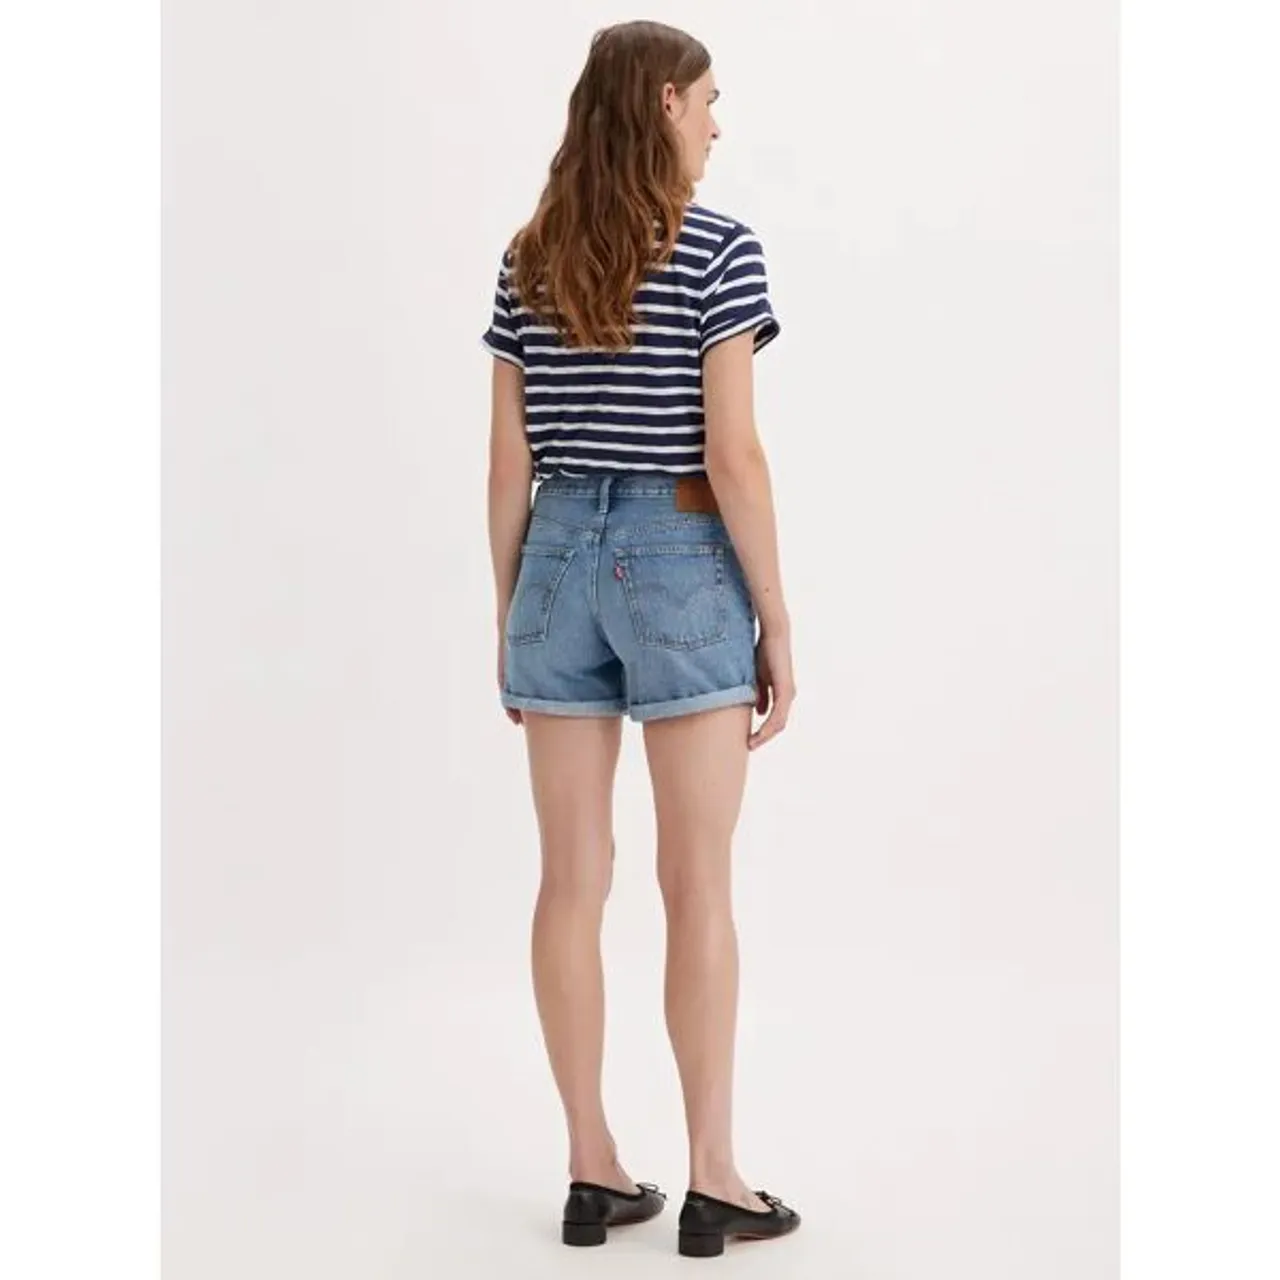 Levi's Rolled Denim Shorts, Must Be Mine - Must Be Mine - Female